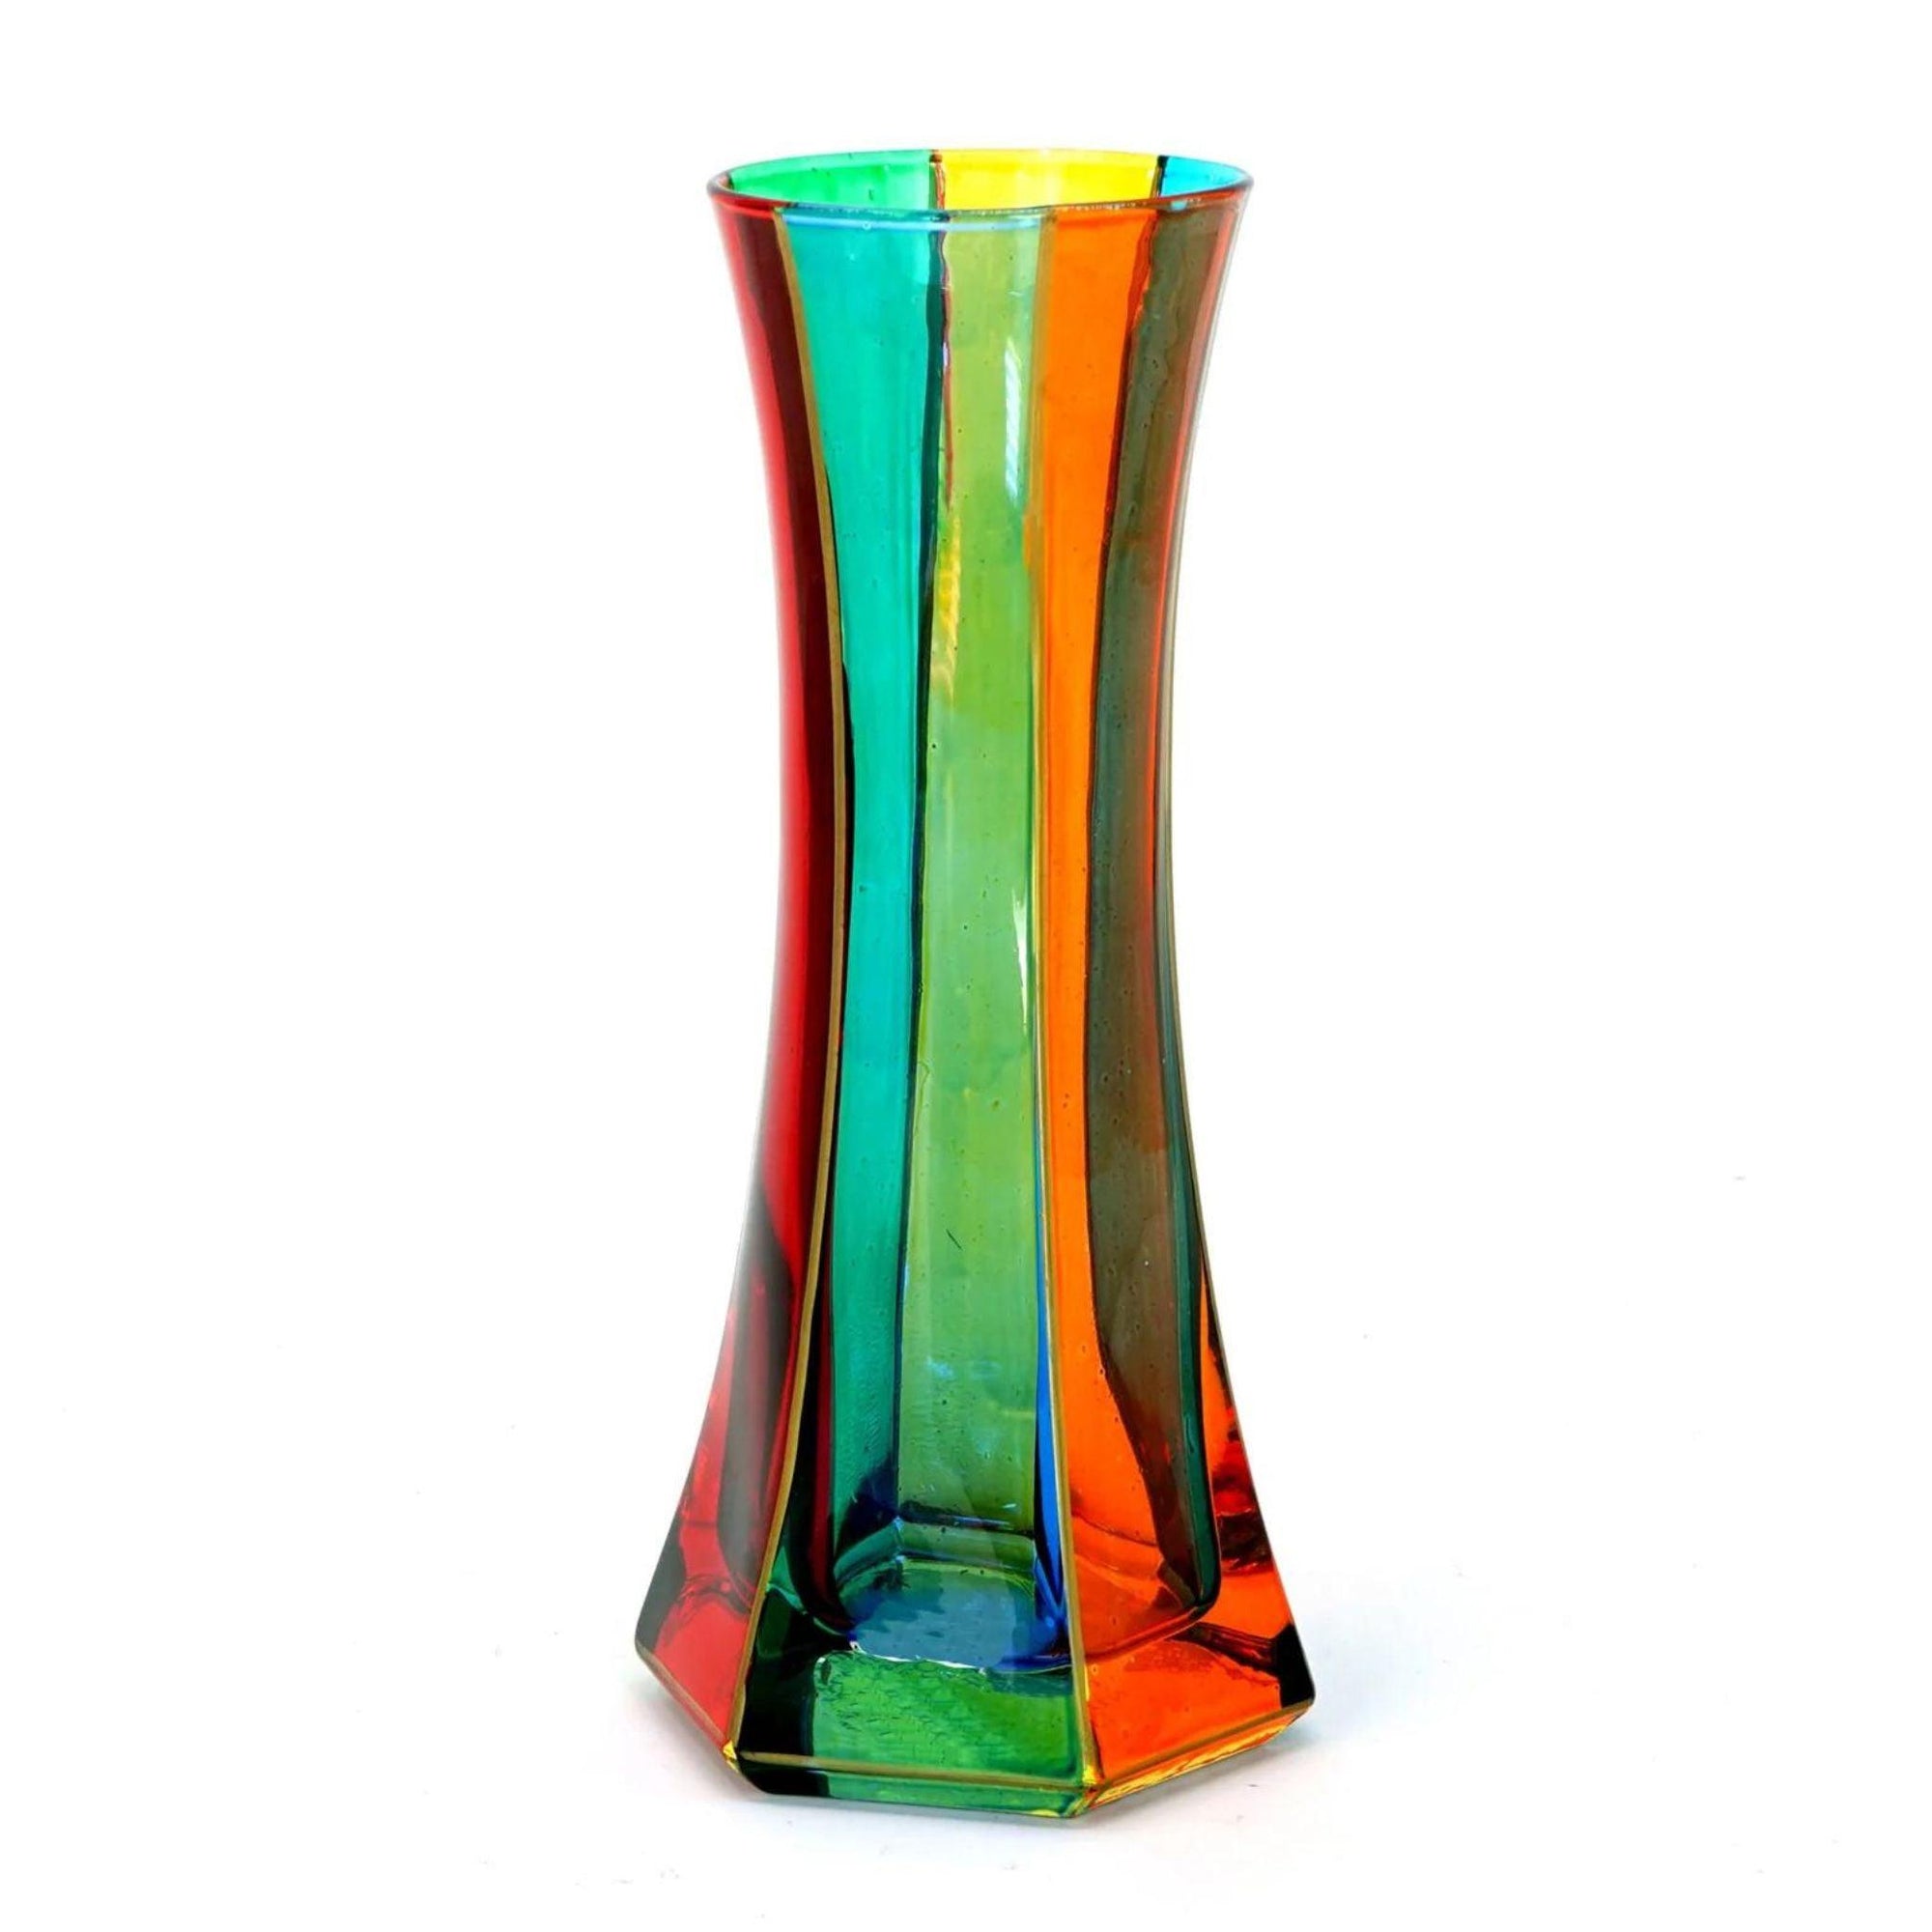 Swatch Venetian Glass Bud Vase, Primary Colors, Made in Italy at MyItalianDecor